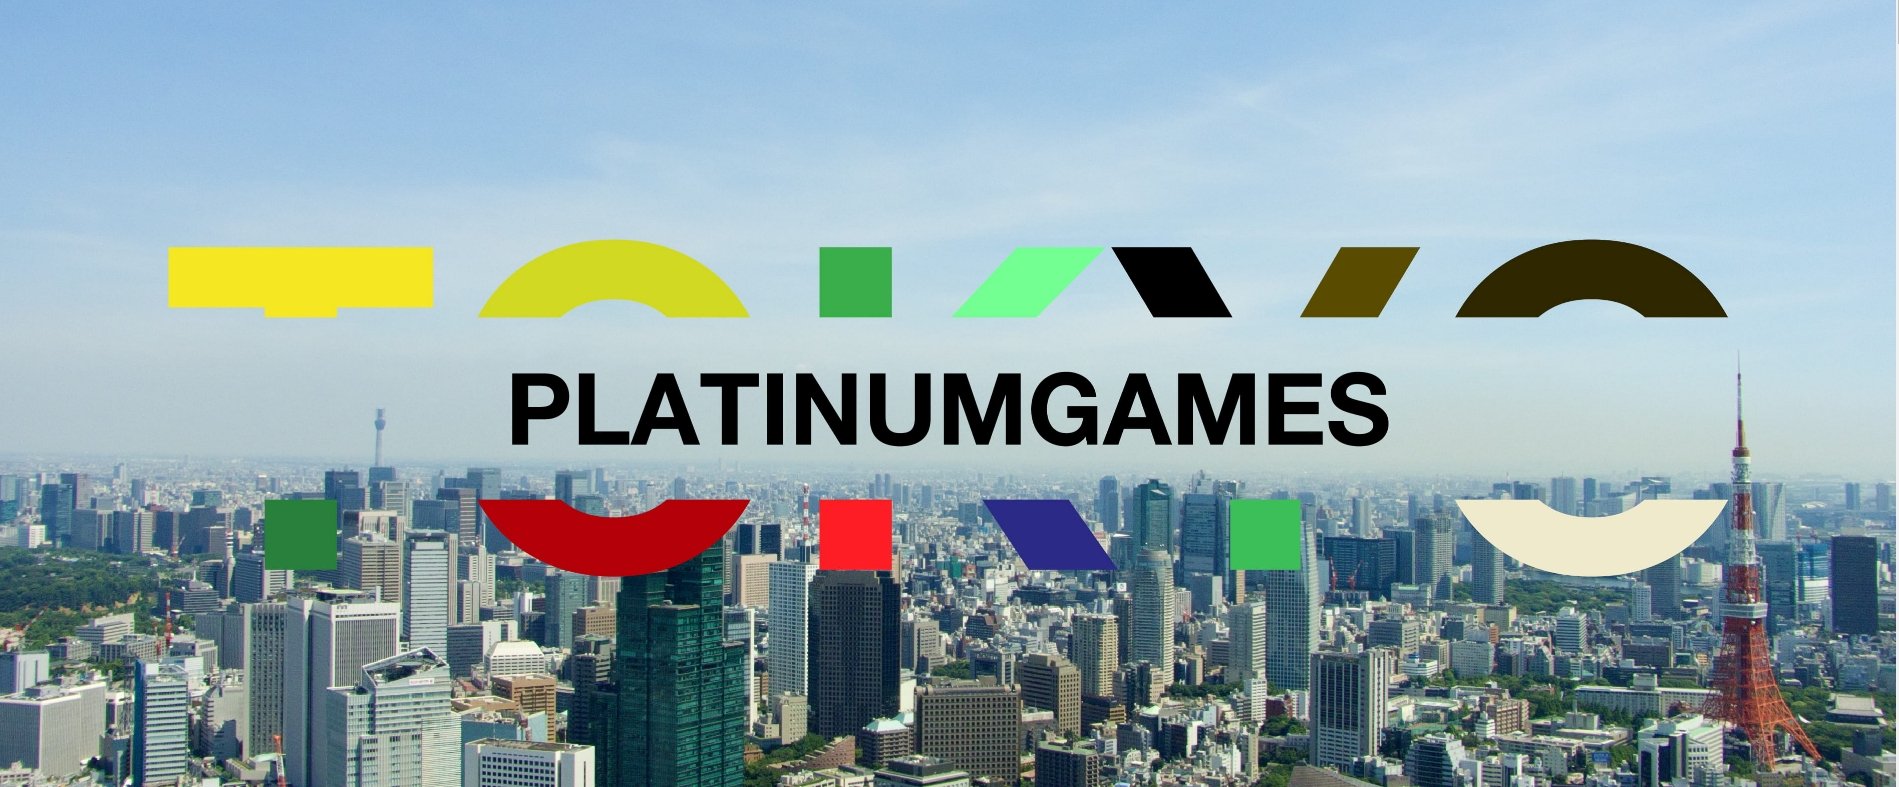 PlatinumGames Tokyo Will Focus On Console Live Ops Development